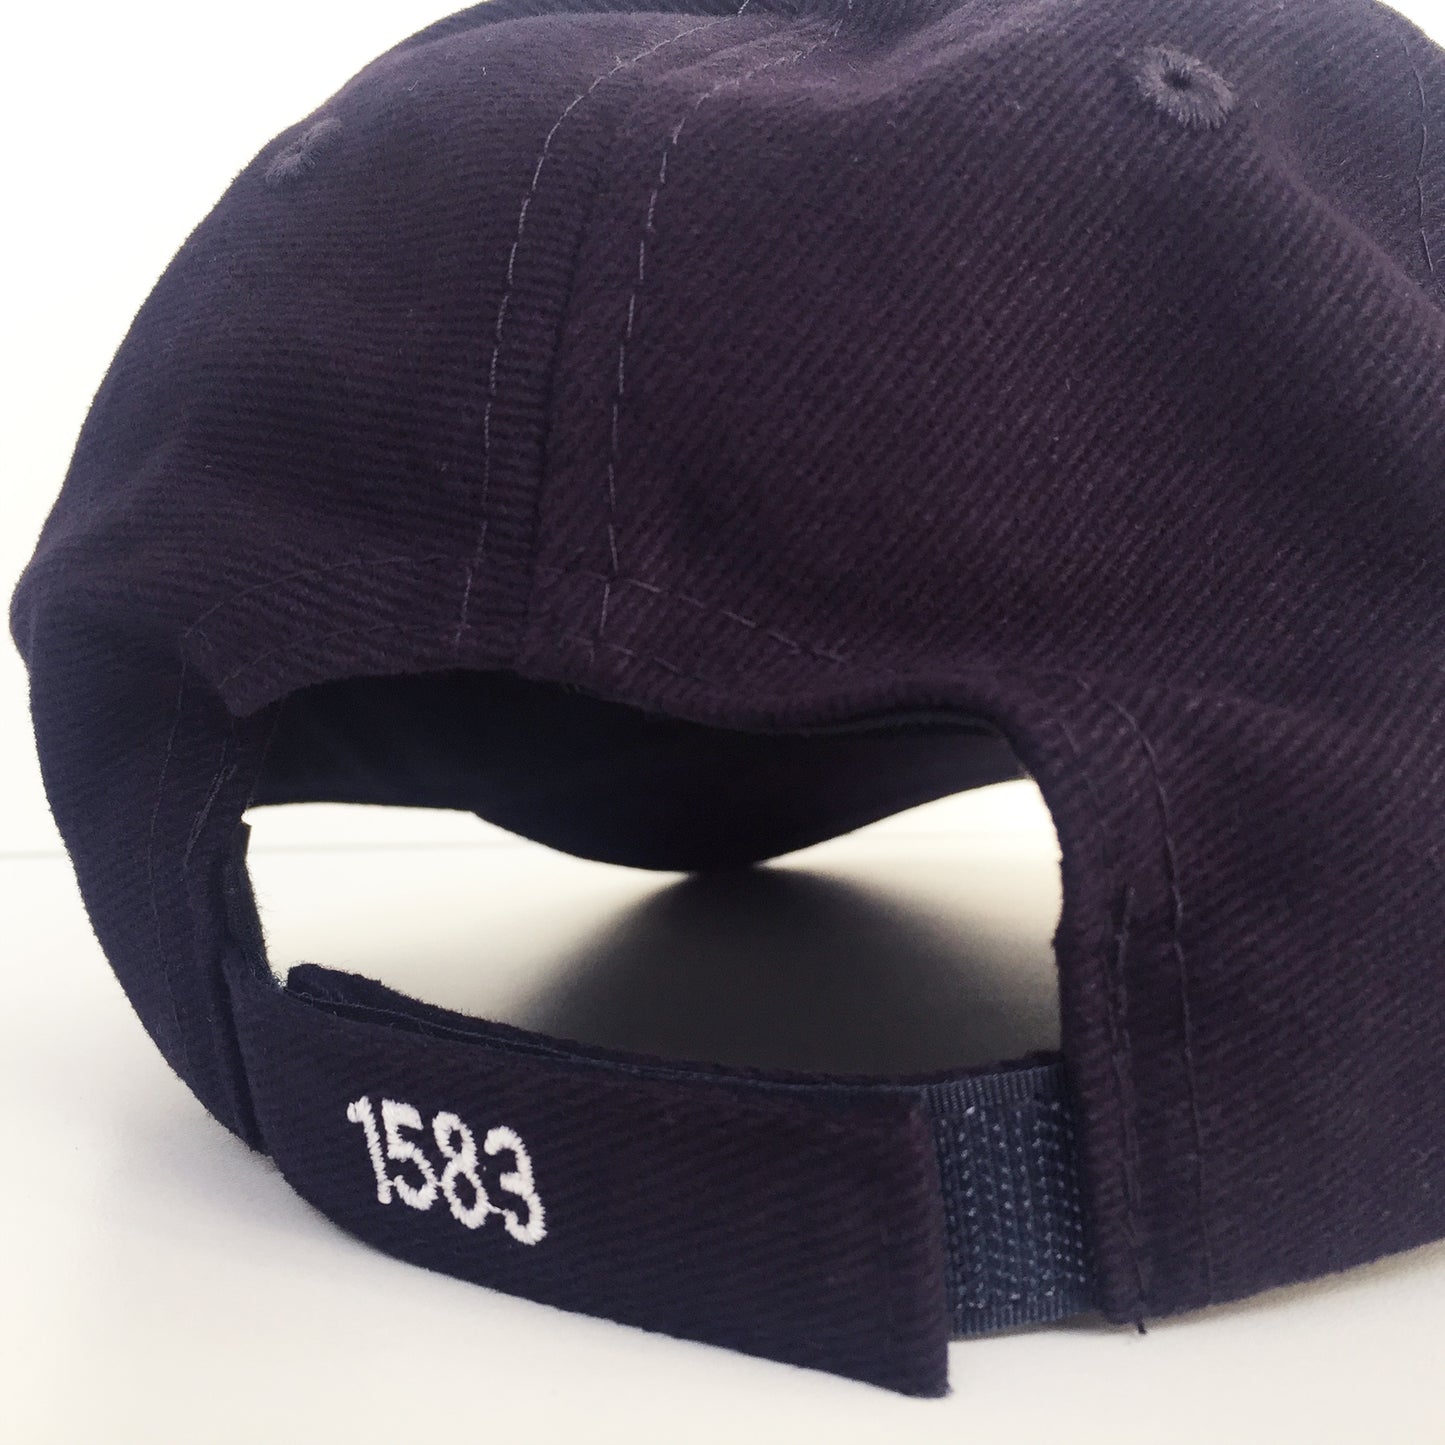 Close up of the adjustable Velcro strap with '1583' embroidery,